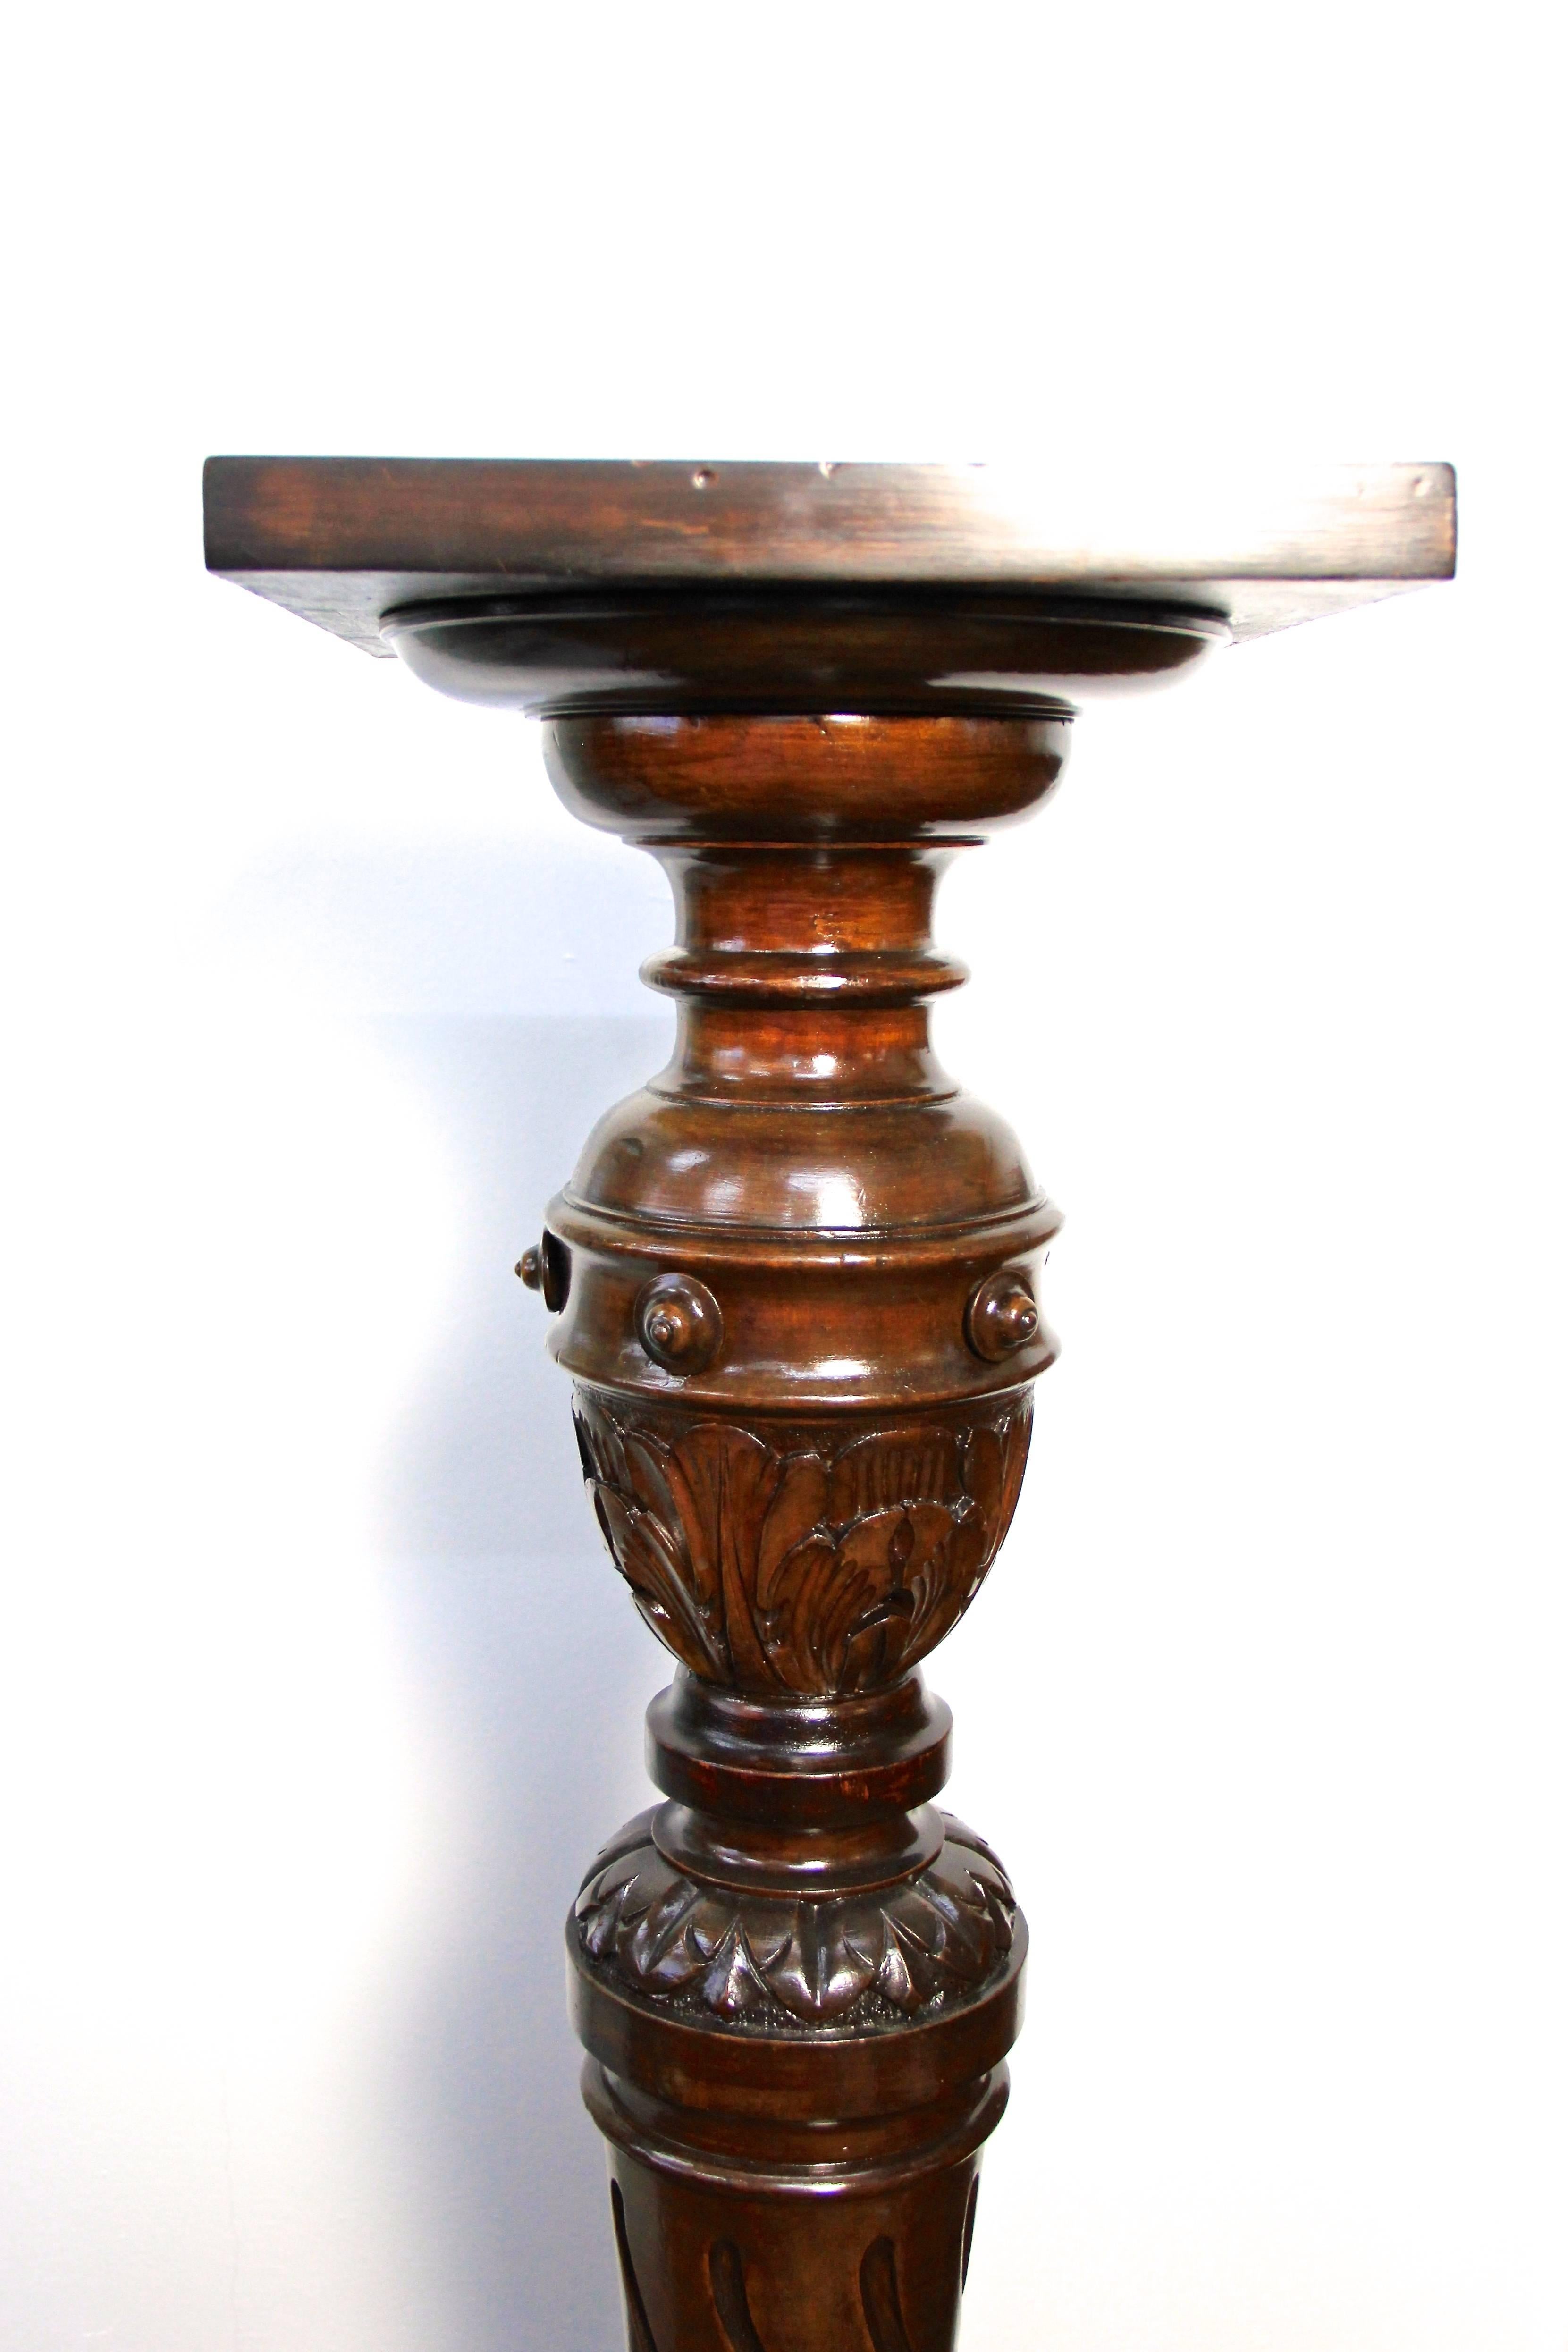 Lovely late 19th century Walnut Pedestal from circa 1870 with classy design. Elaborately hand carved out of solid nut wood, this beautiful Austrian column/ pedestal impresses with a fantastic design: adorned by floral elements, the elaborate made